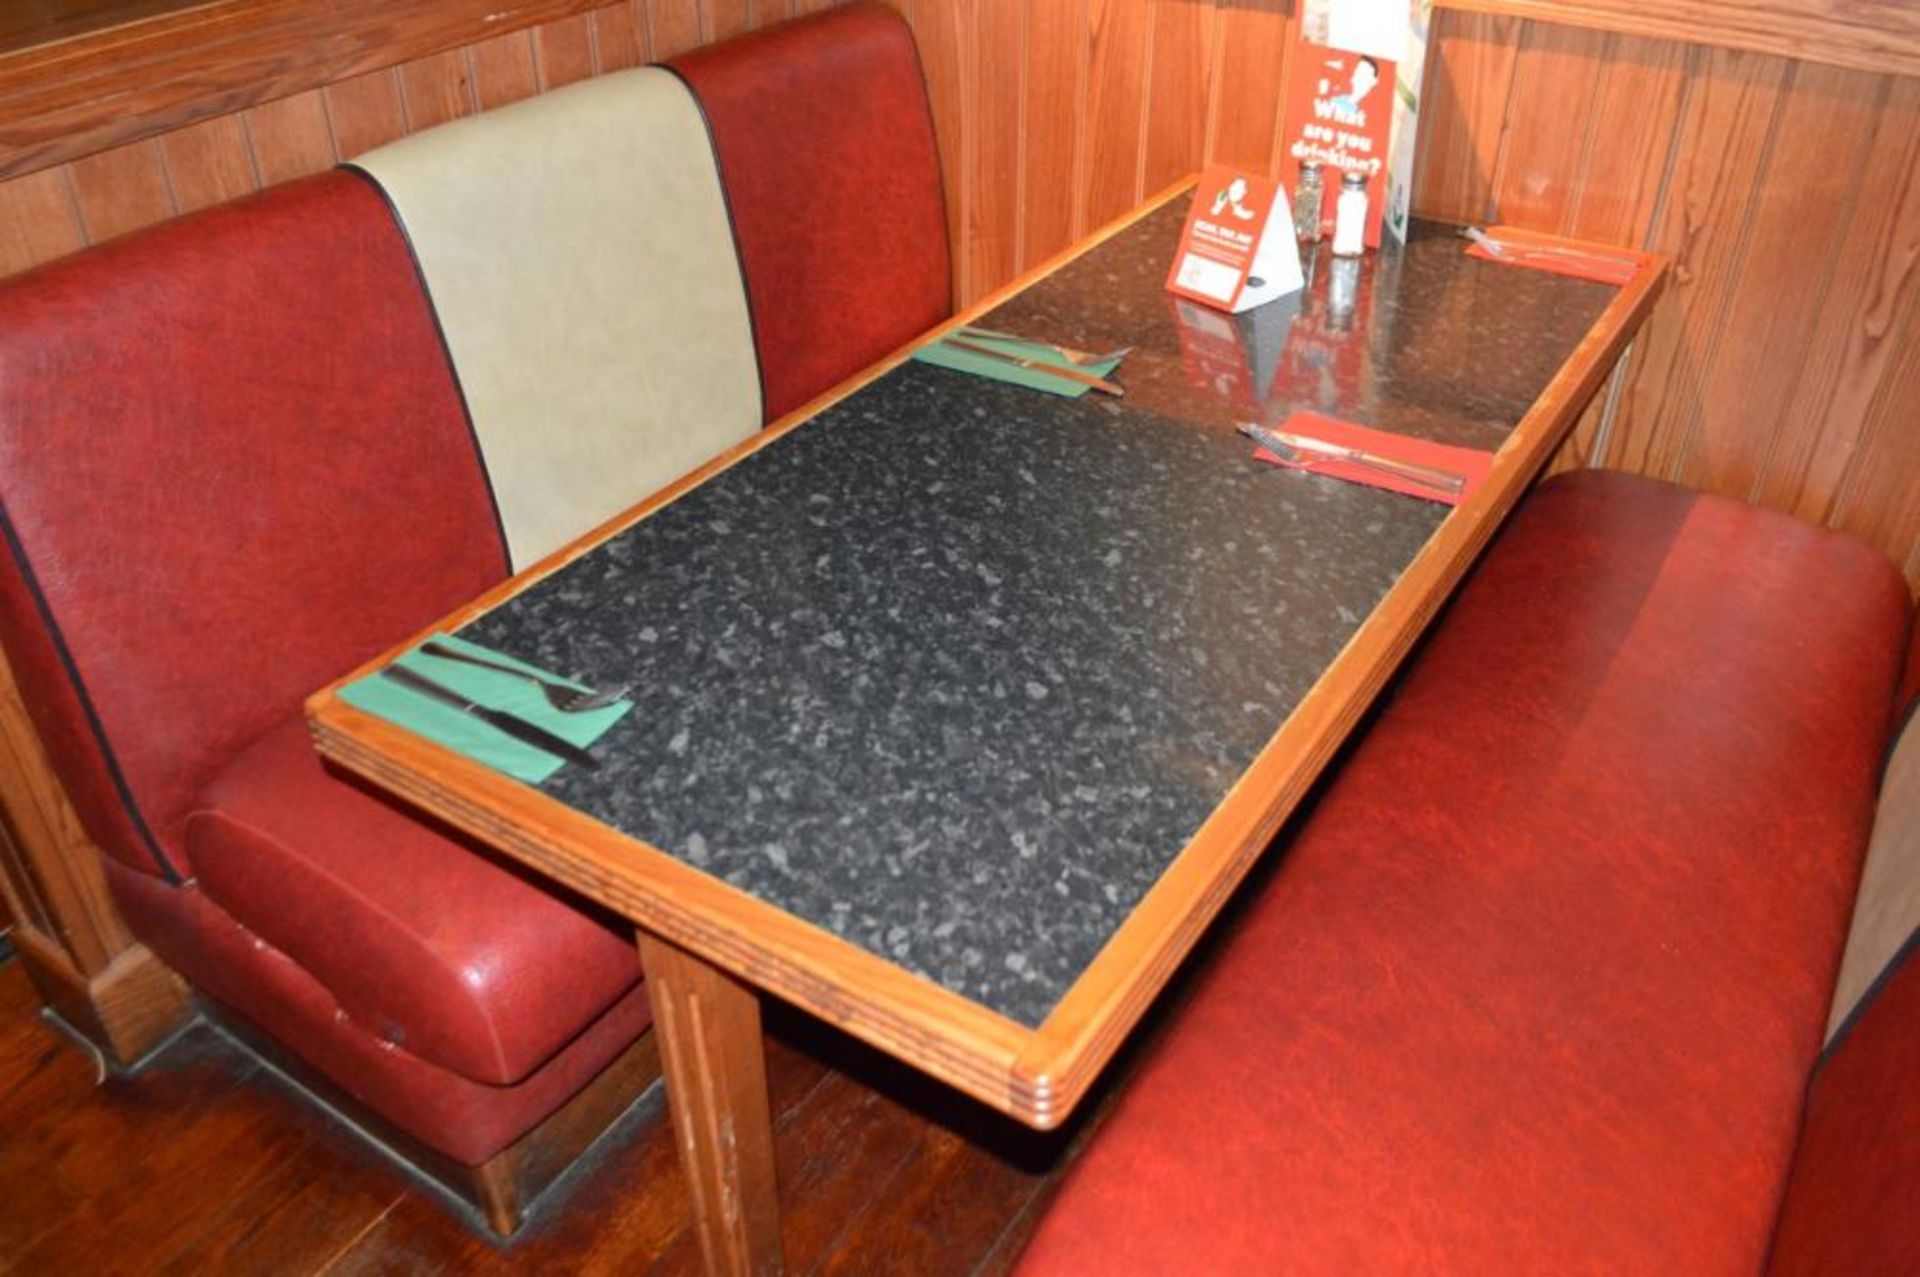 1 x Selection of Cosy Bespoke Seating Booths in a 1950's Retro American Diner Design With Dining Tab - Image 4 of 10